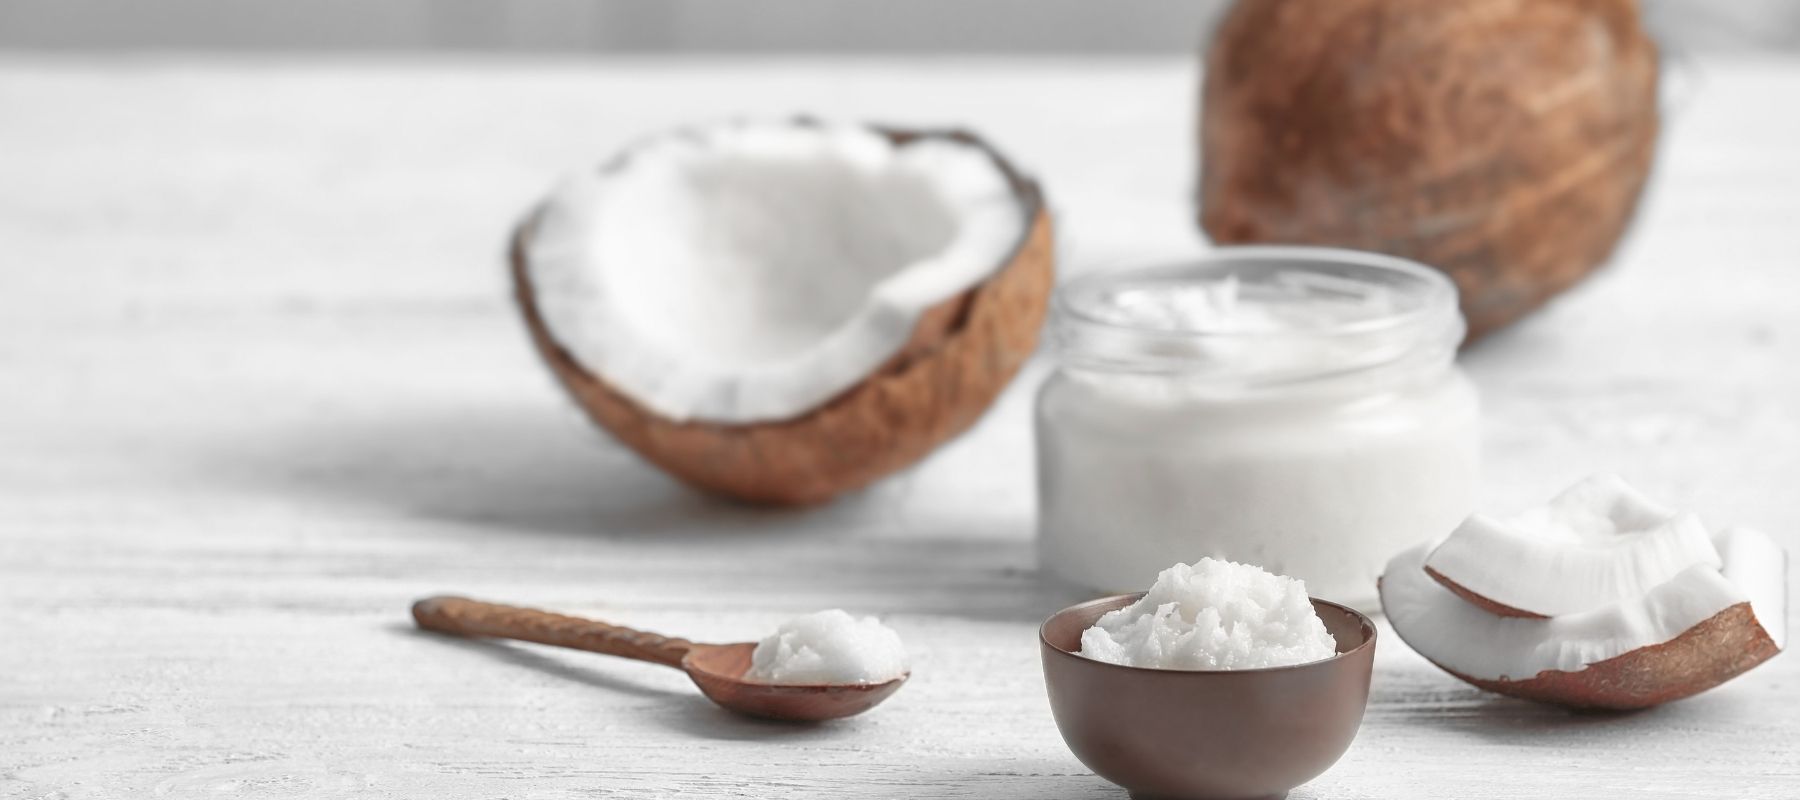 Coconut oil and how it can heal Psoriasis